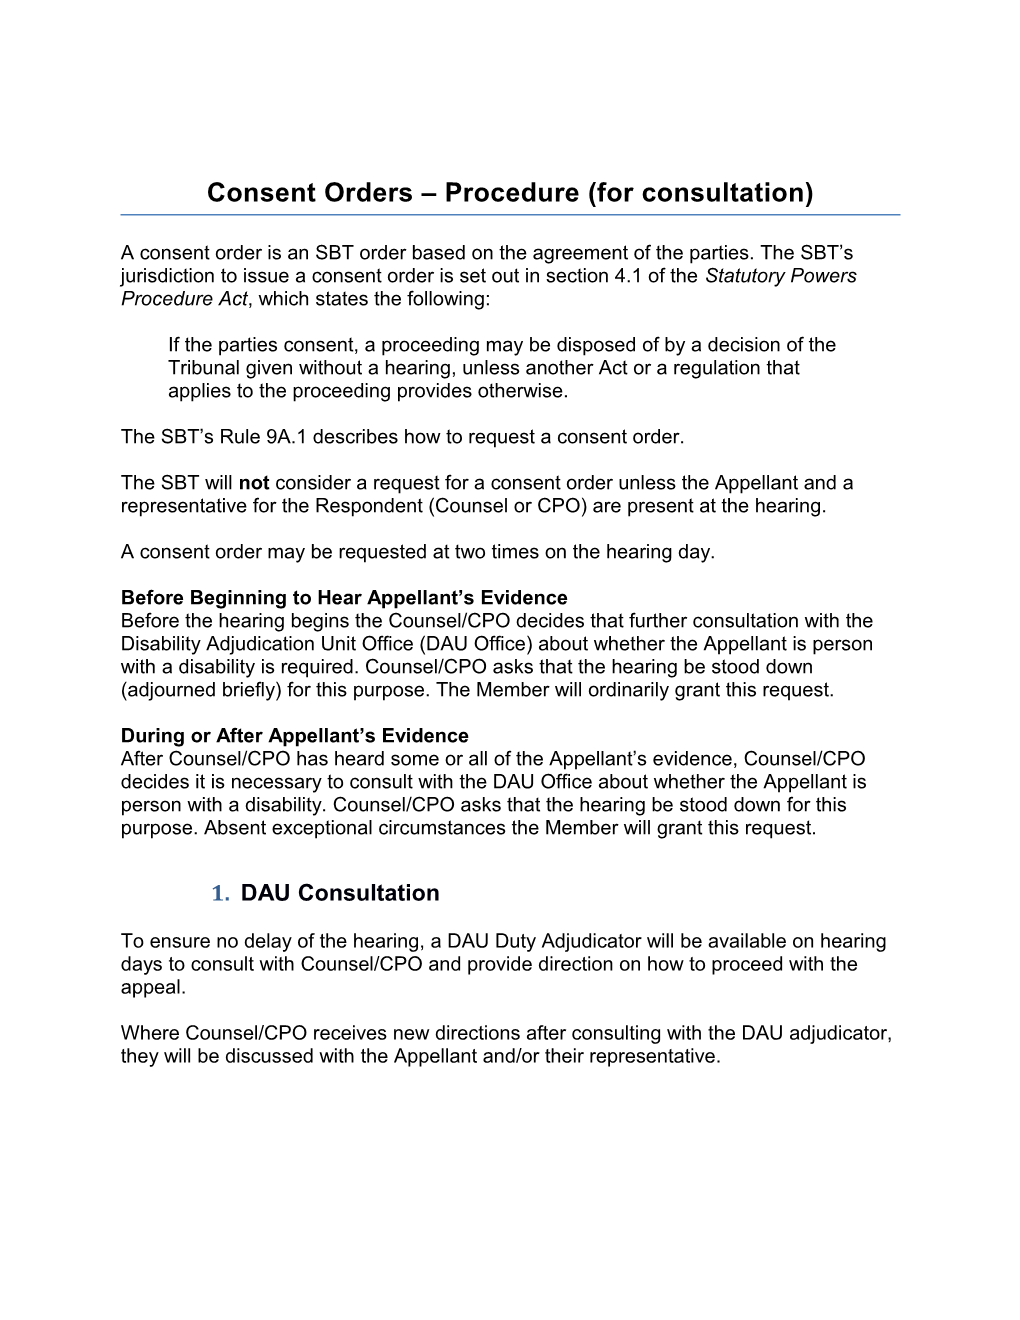 Consent Orders Procedure (For Consultation)